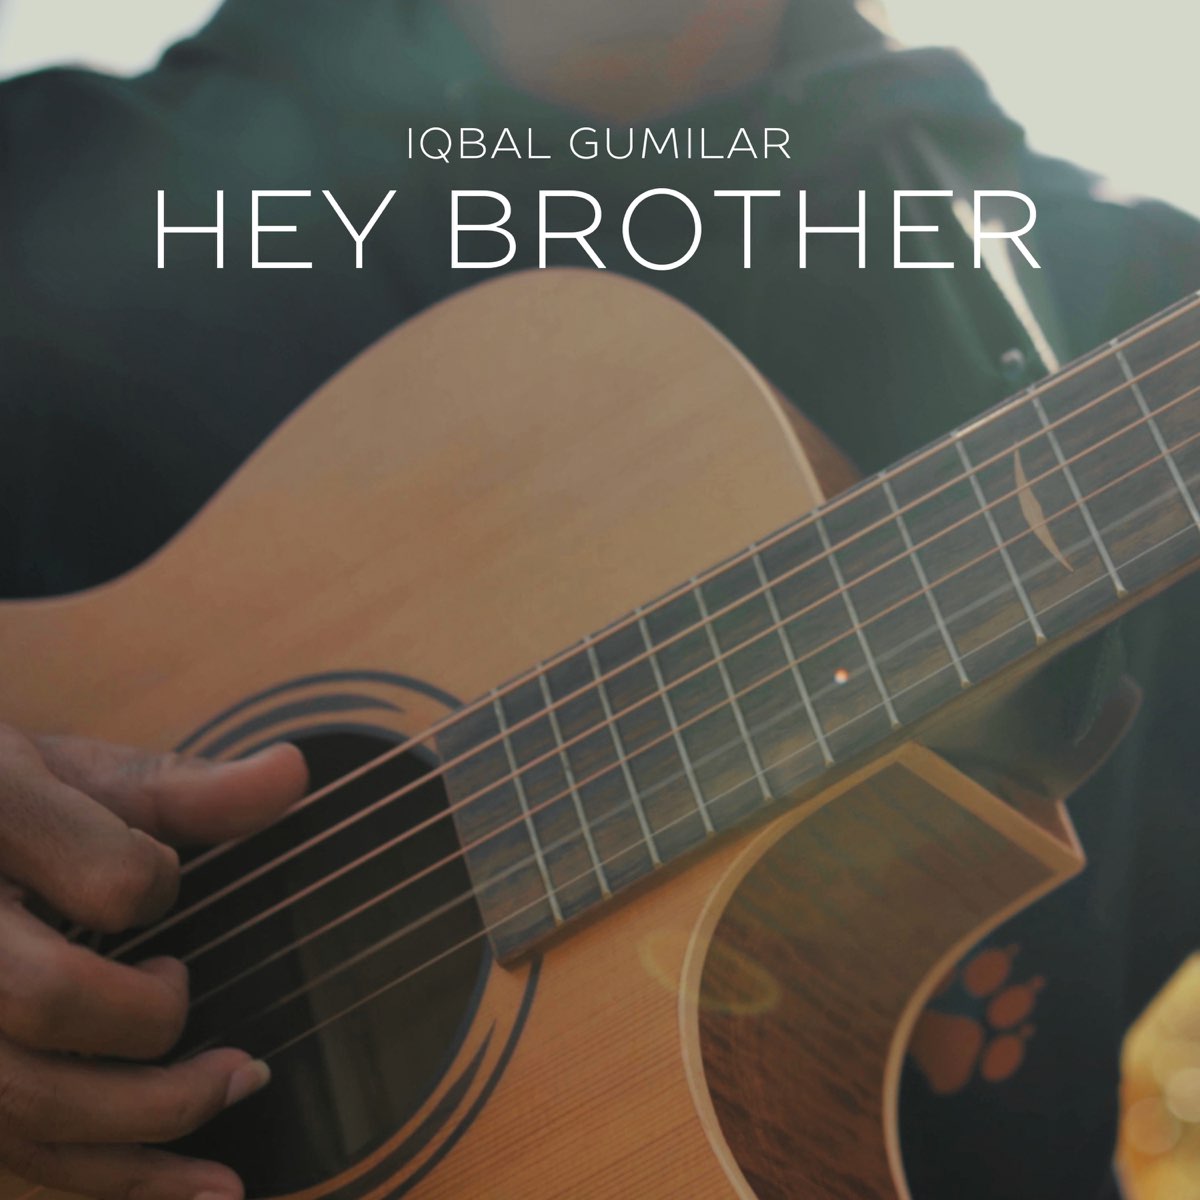 Guitar brothers